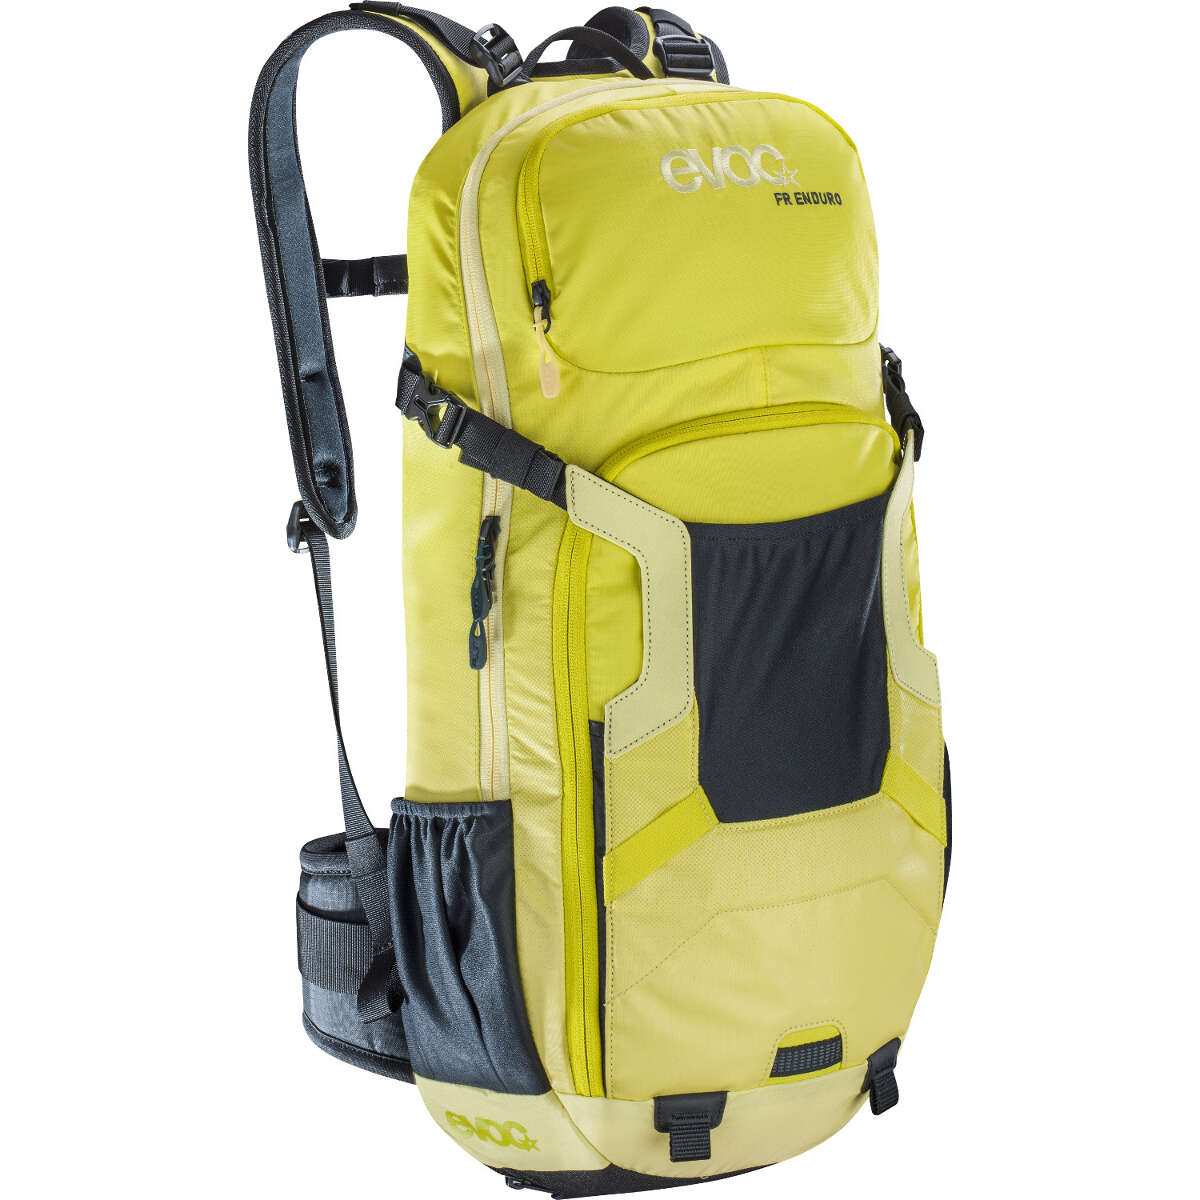 Evoc Protector Backpack with Hydration System Compartment FR Enduro Sulphur-Yellow, 16 Liter